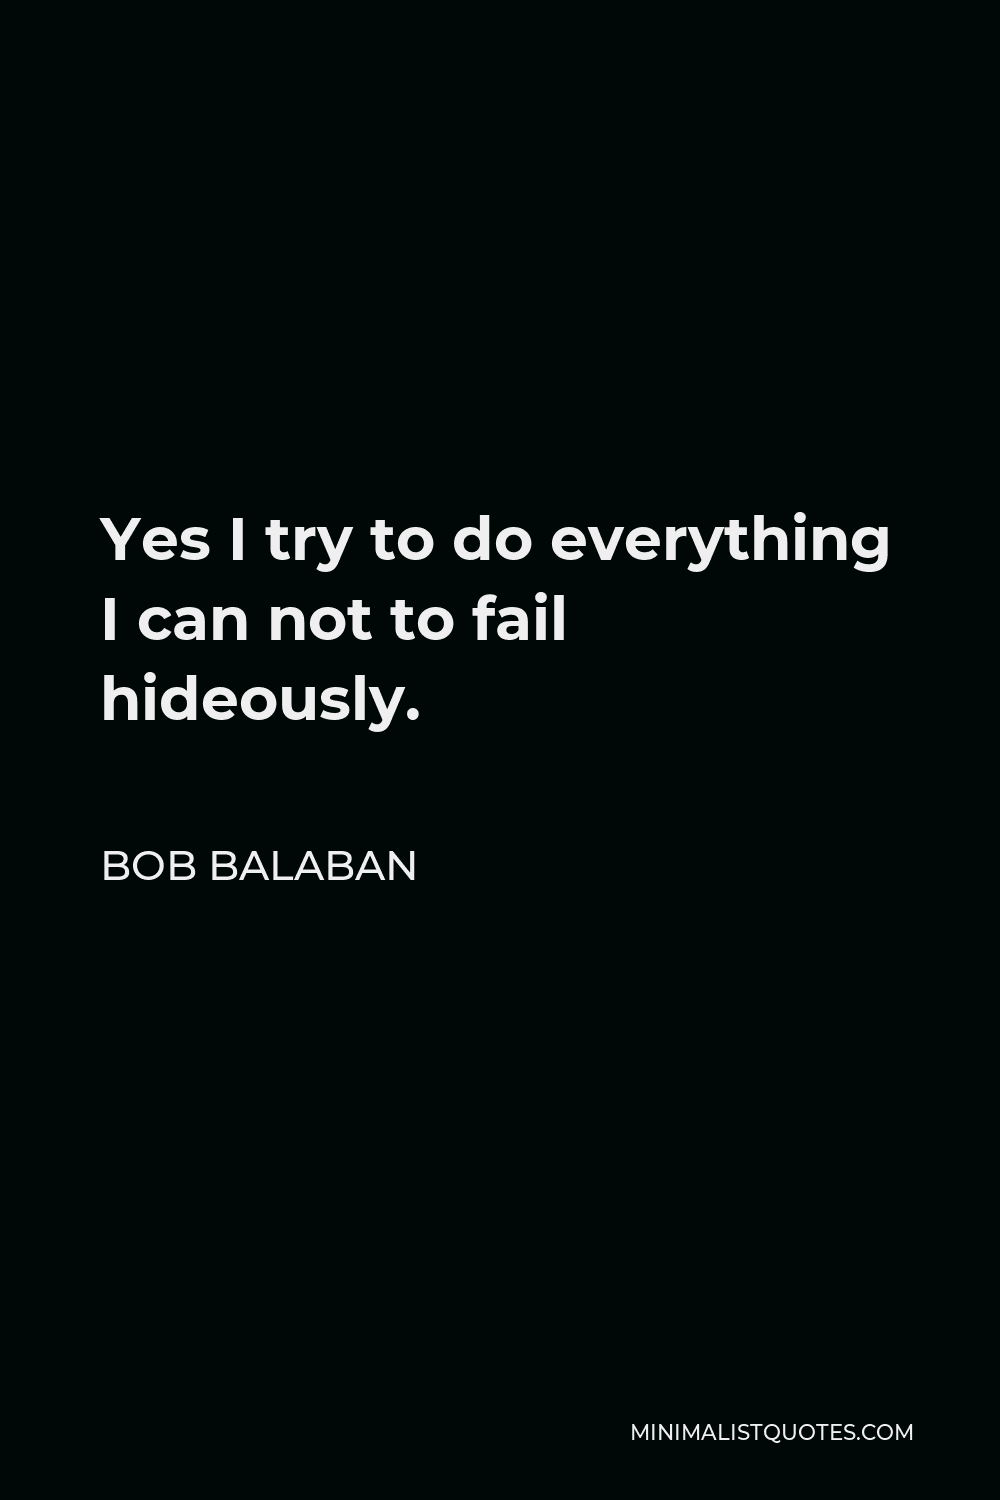 Bob Balaban Quote - Yes I try to do everything I can not to fail hideously.